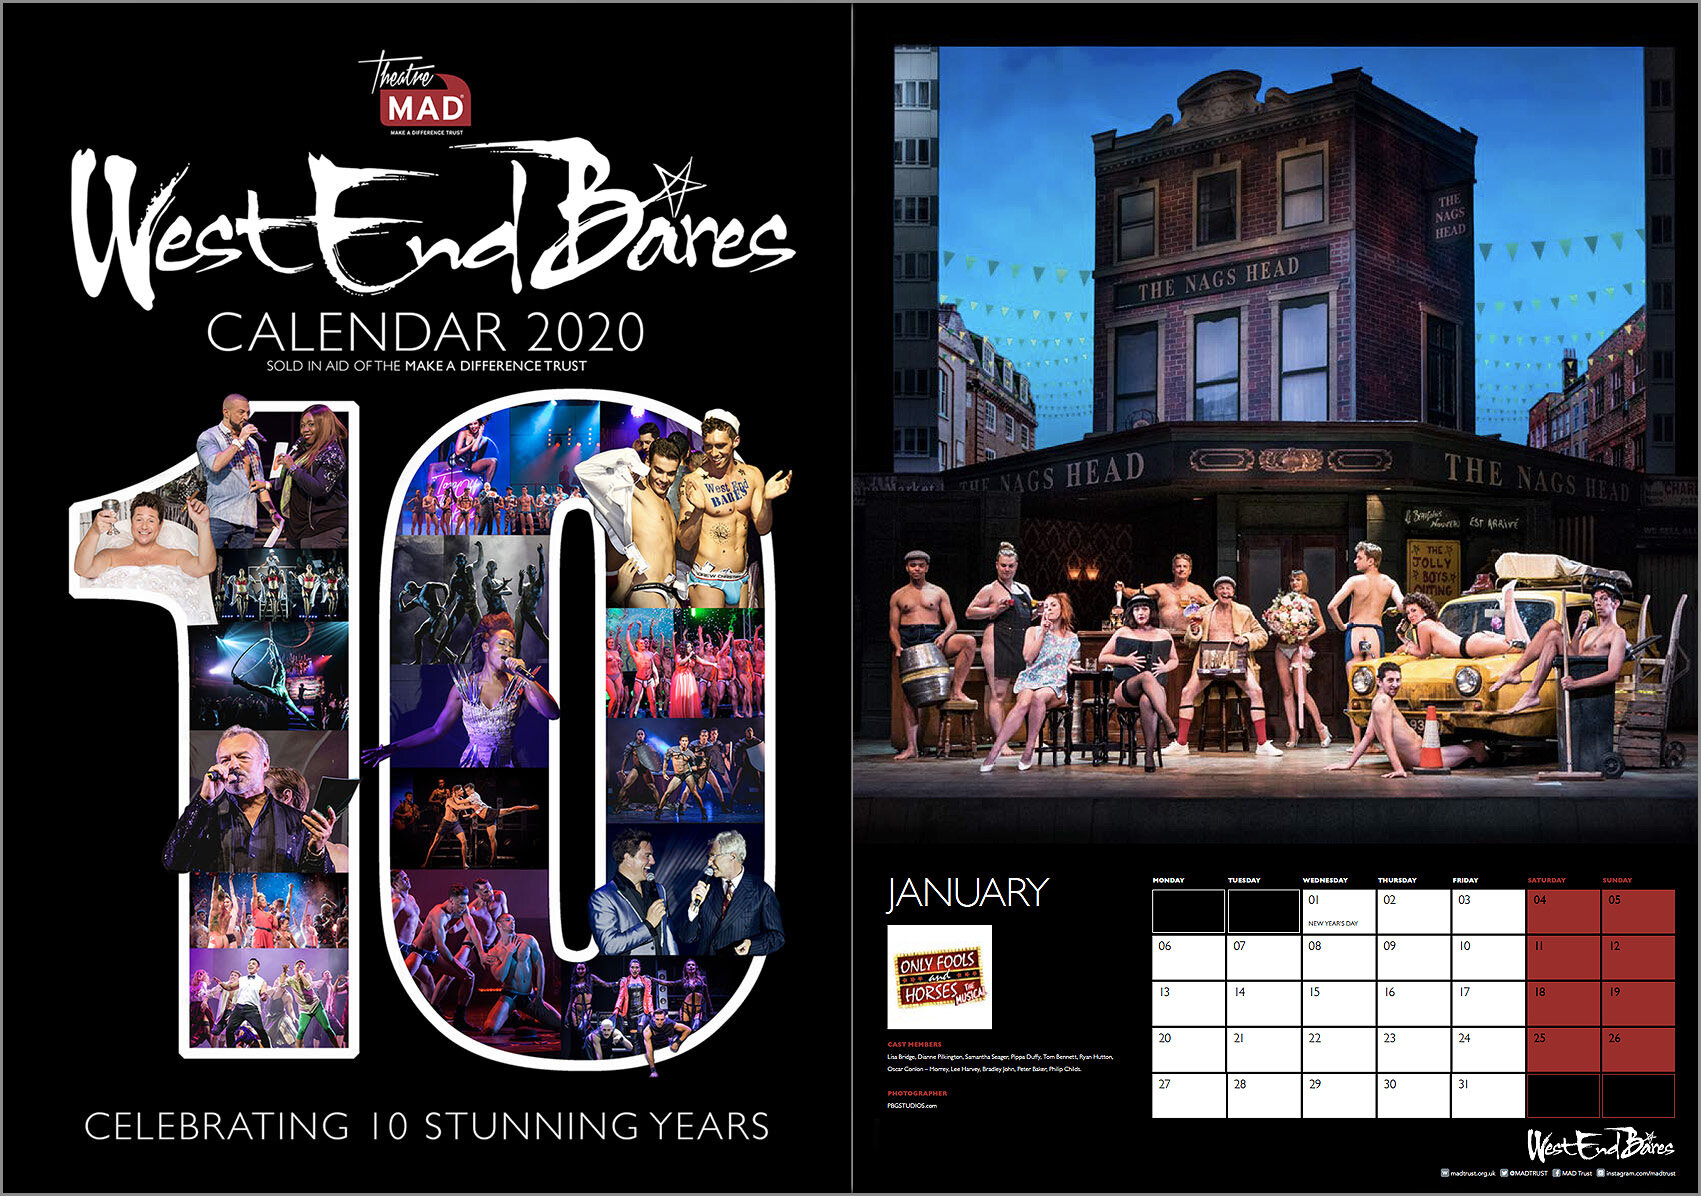 Creative Director for West End Bares 2020 Calendar sold in aid of the MAD trust (Cover and Only Fools and Horses page)